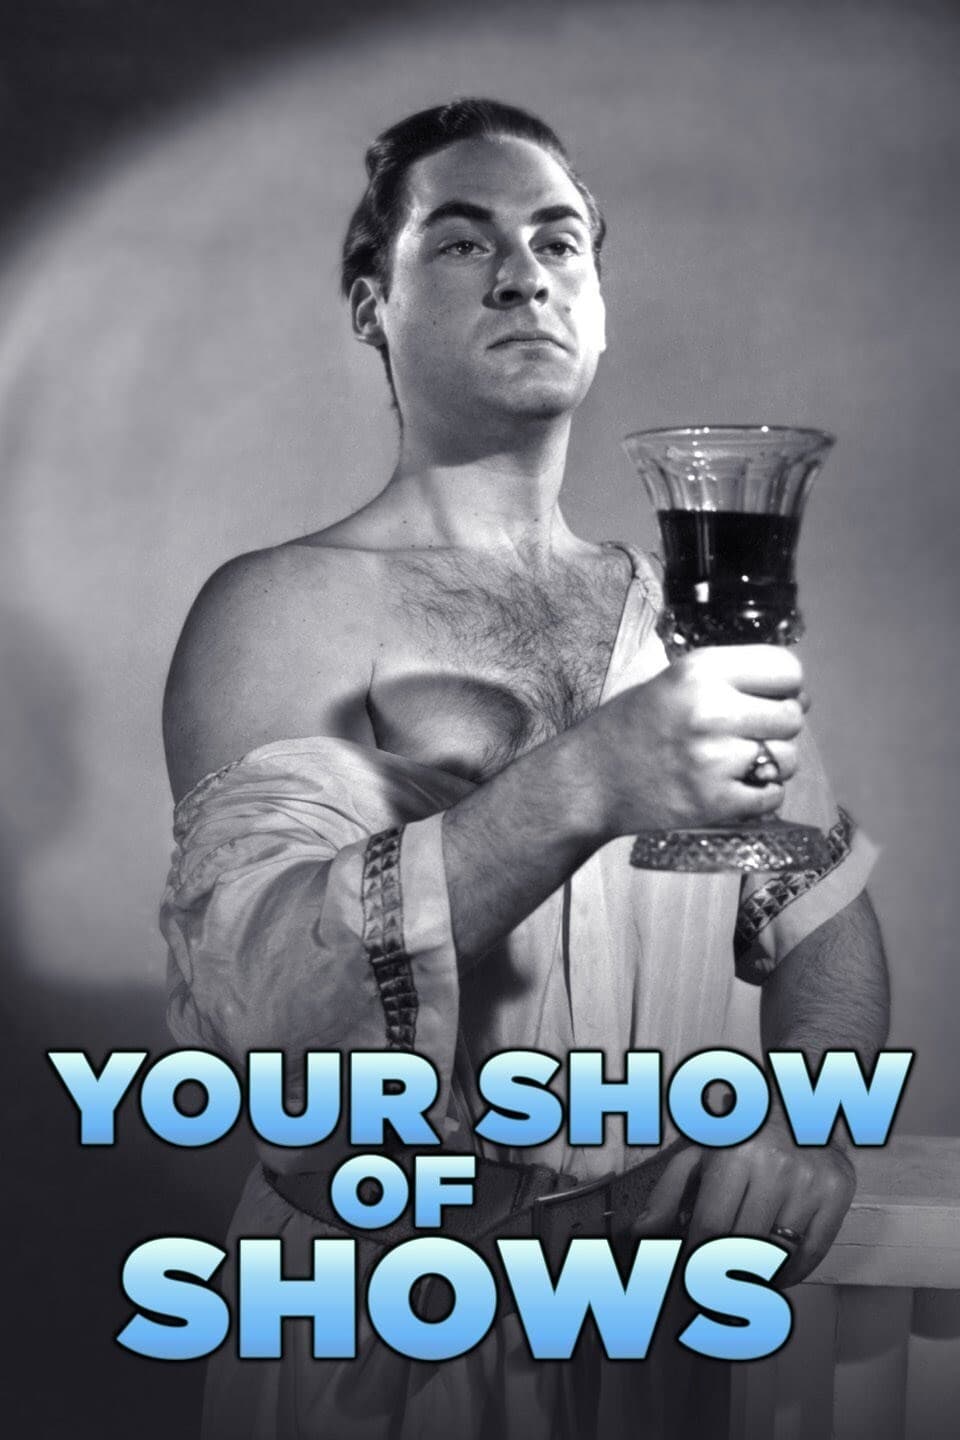 Your Show of Shows (1950)